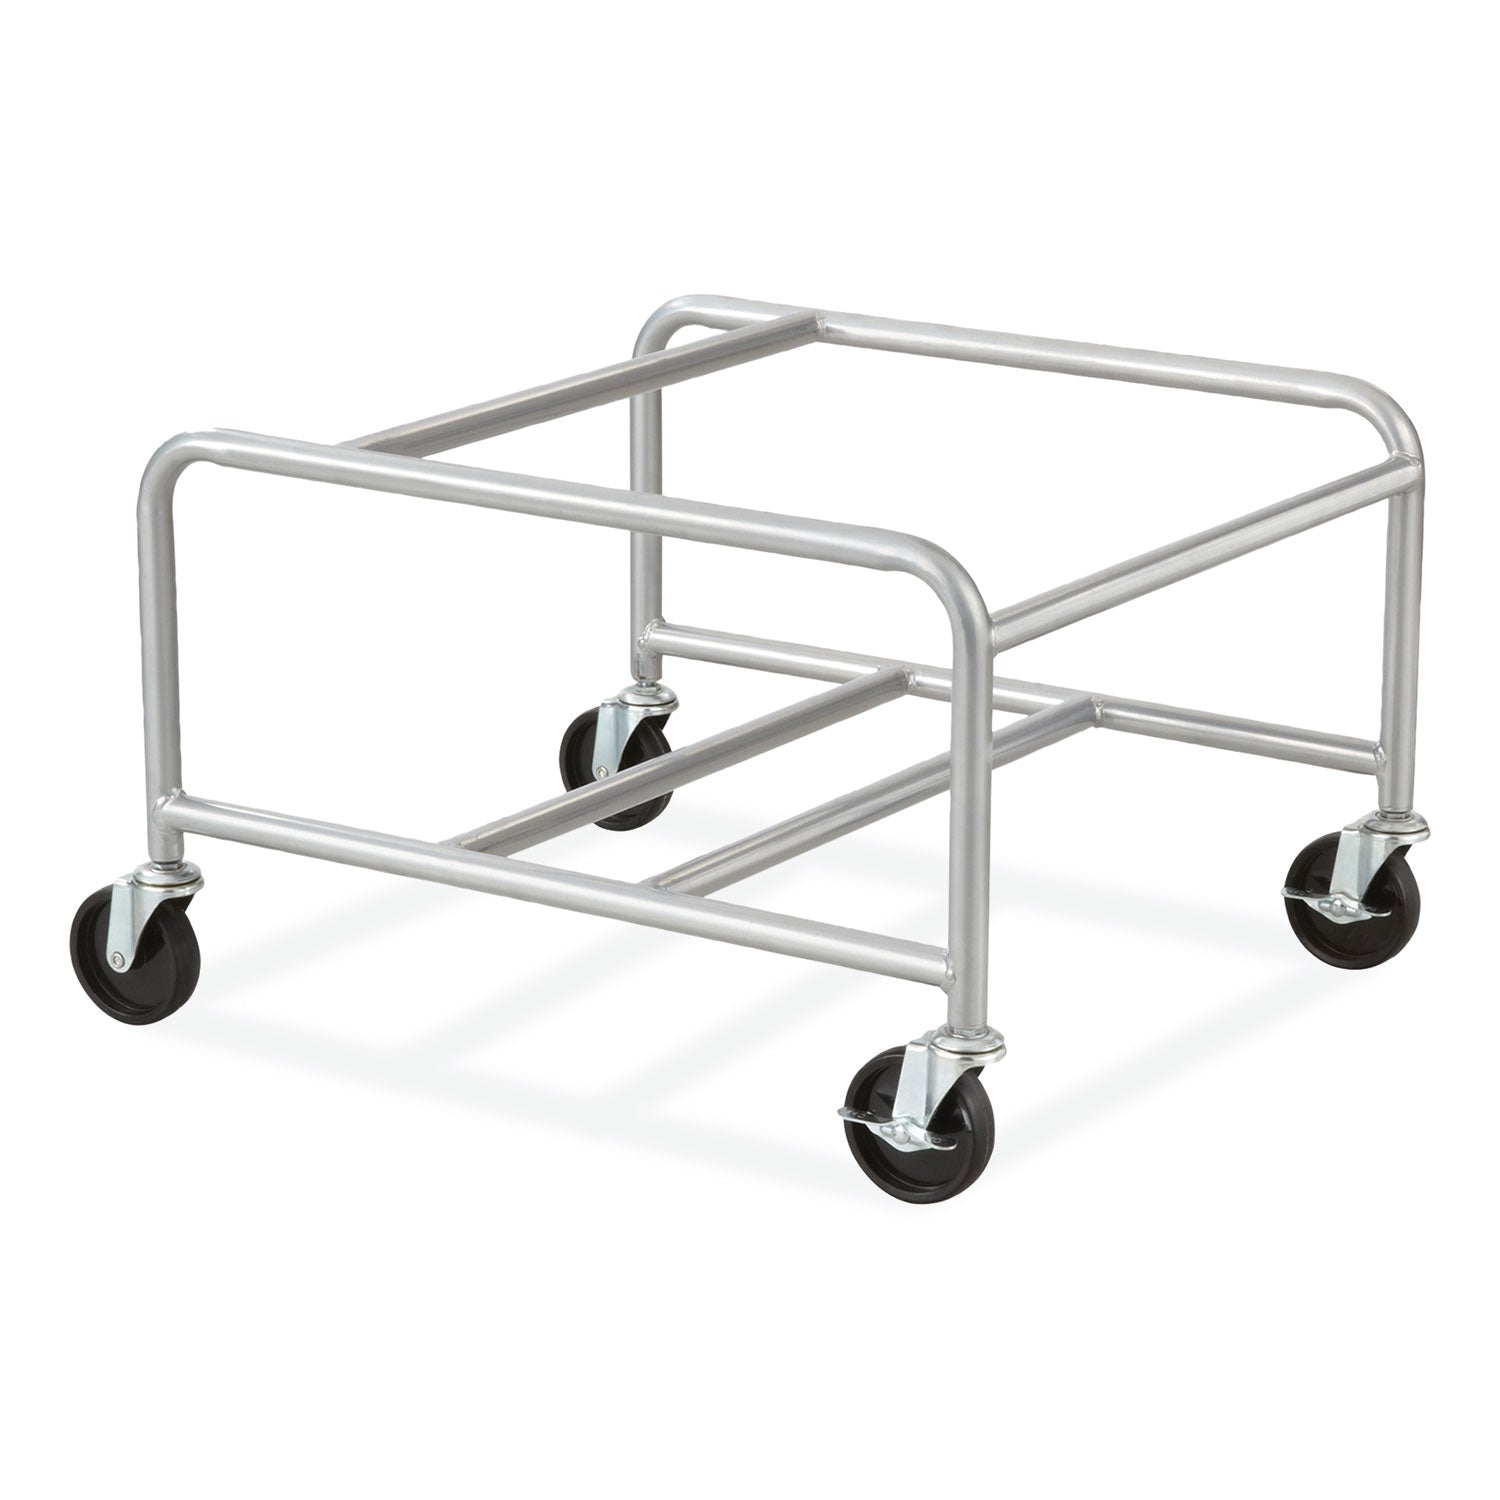 sled-base-stack-chair-cart-metal-500-lb-capacity-235-x-275-x-17-silver-ships-in-1-3-business-days_saf4190sl - 1